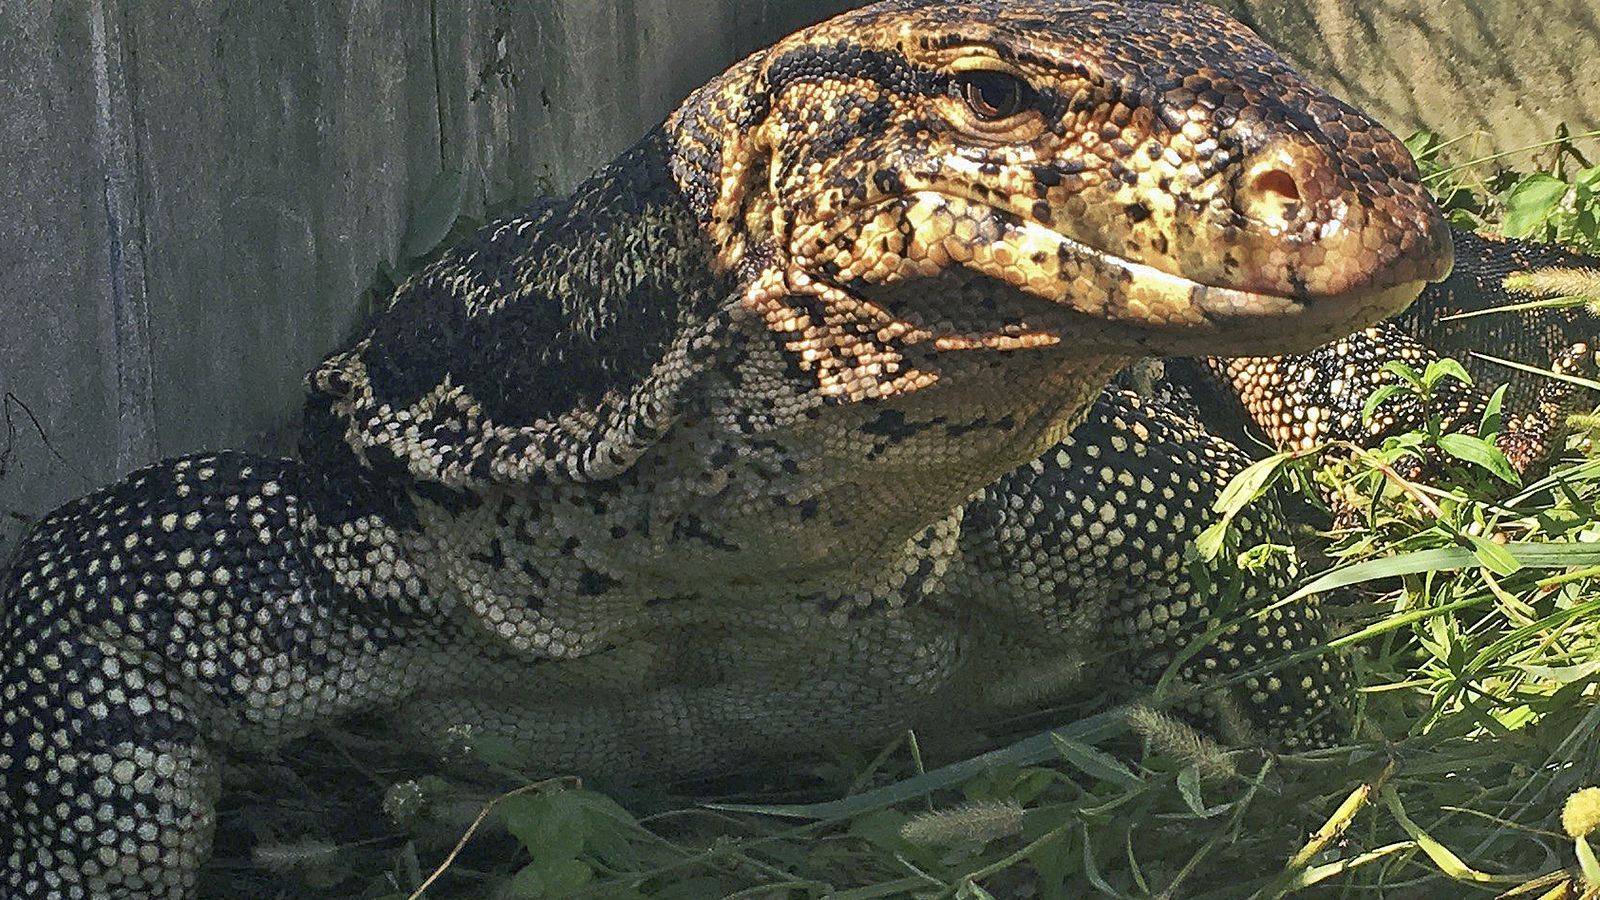 Florida man pleads guilty to smuggling more than 20 monitor lizards into U.S